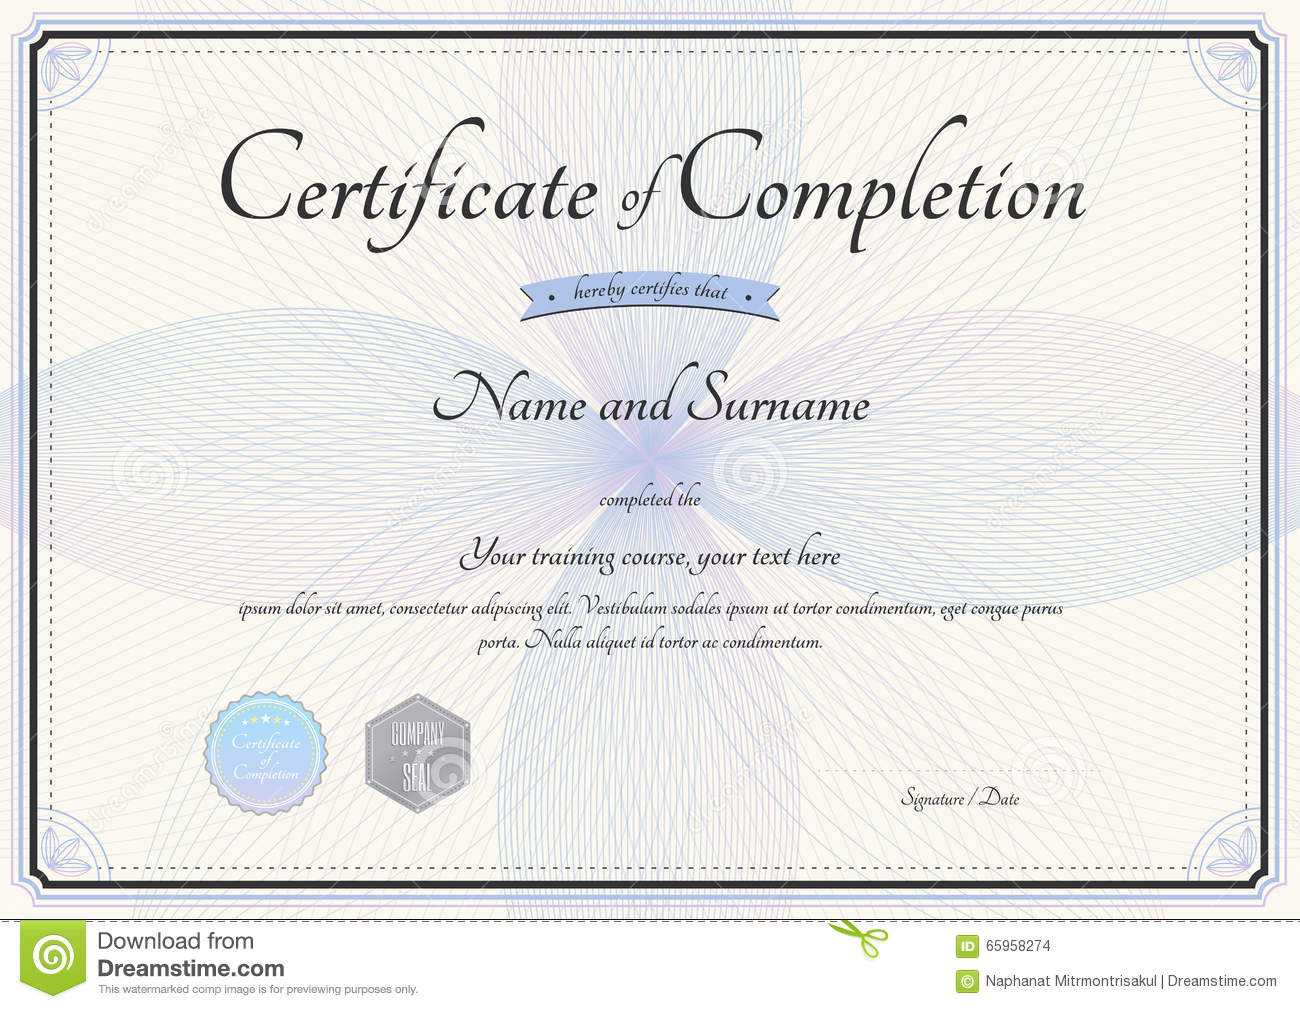 Certificate Of Completion Template In Vector With Florist Regarding Choir Certificate Template